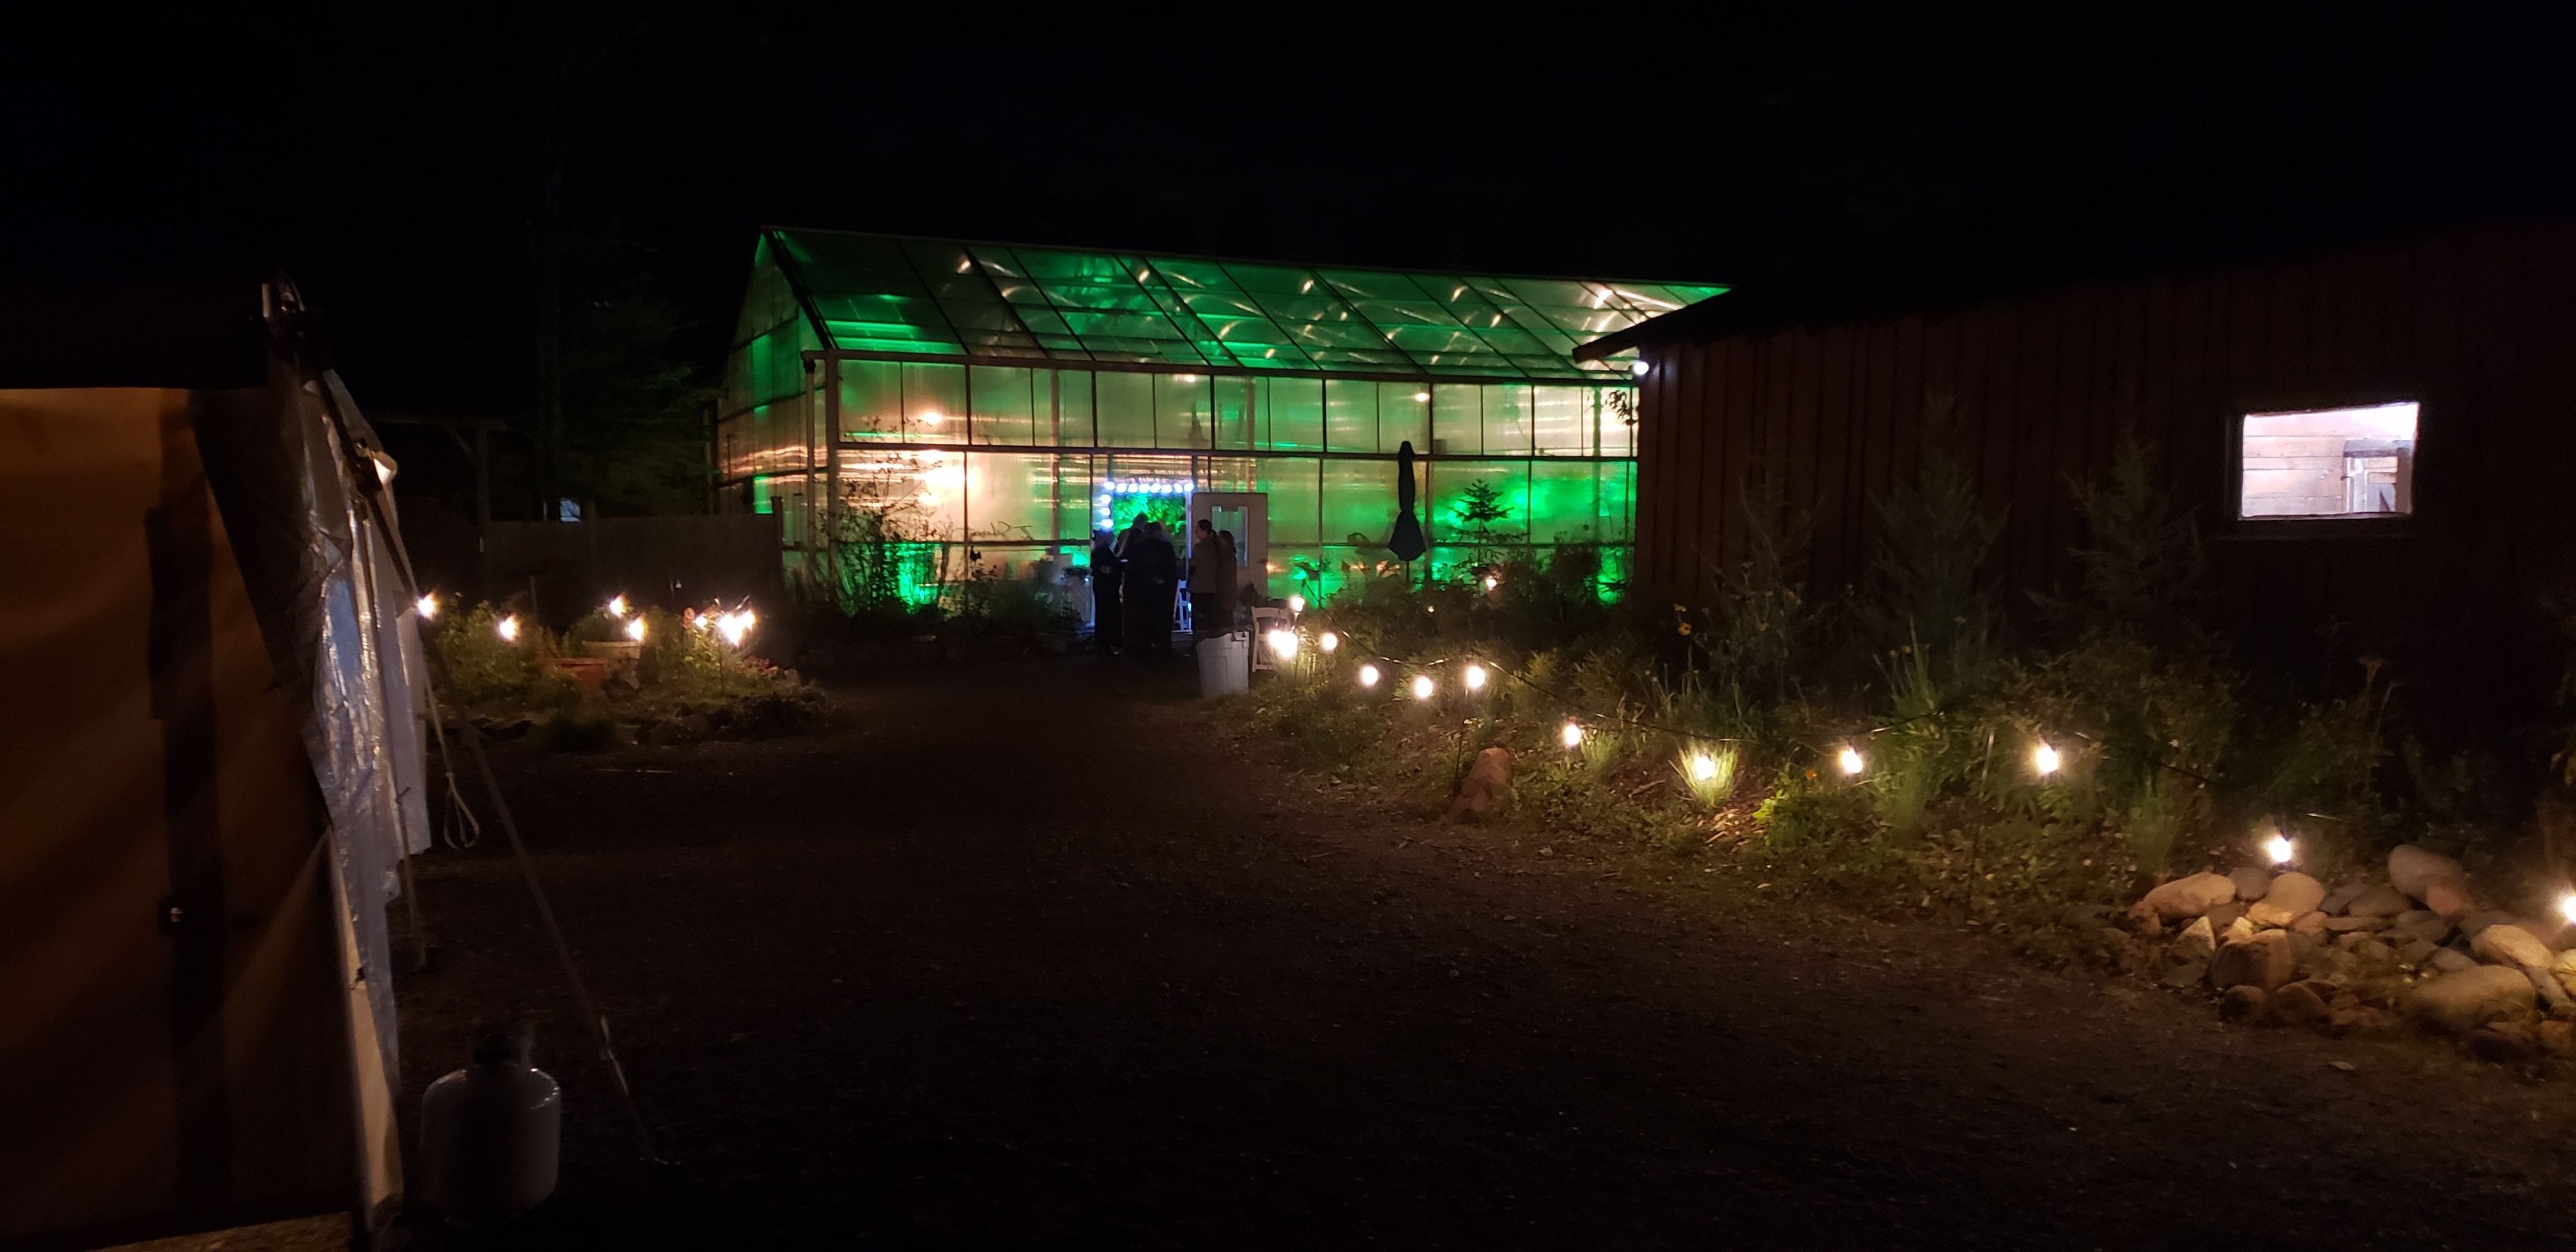 Garden bistro at Sitio with the greenhouse having green up lighting